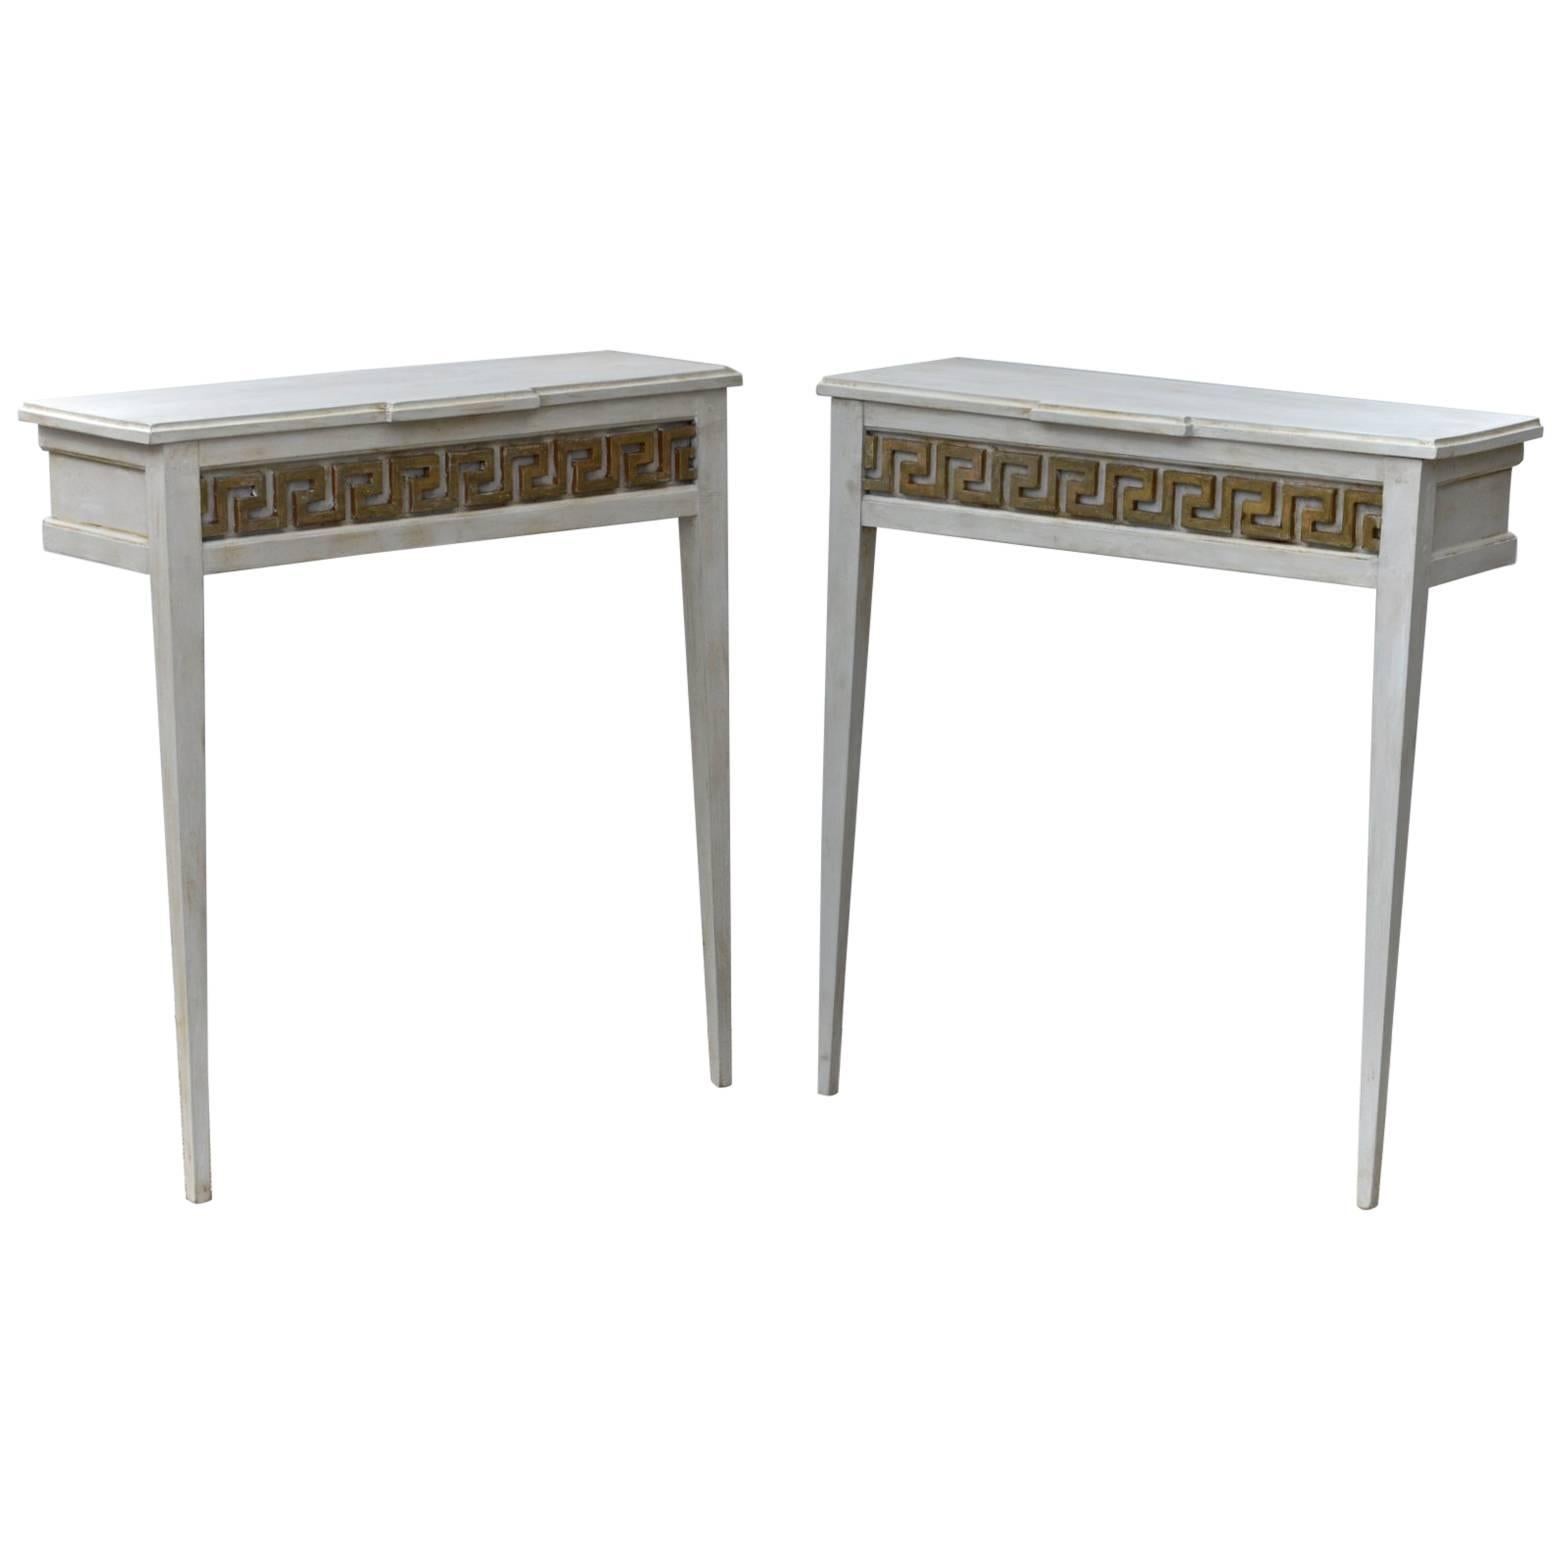 Gustavian Painted Console Tables Having Greek Key Detail, a Pair For Sale